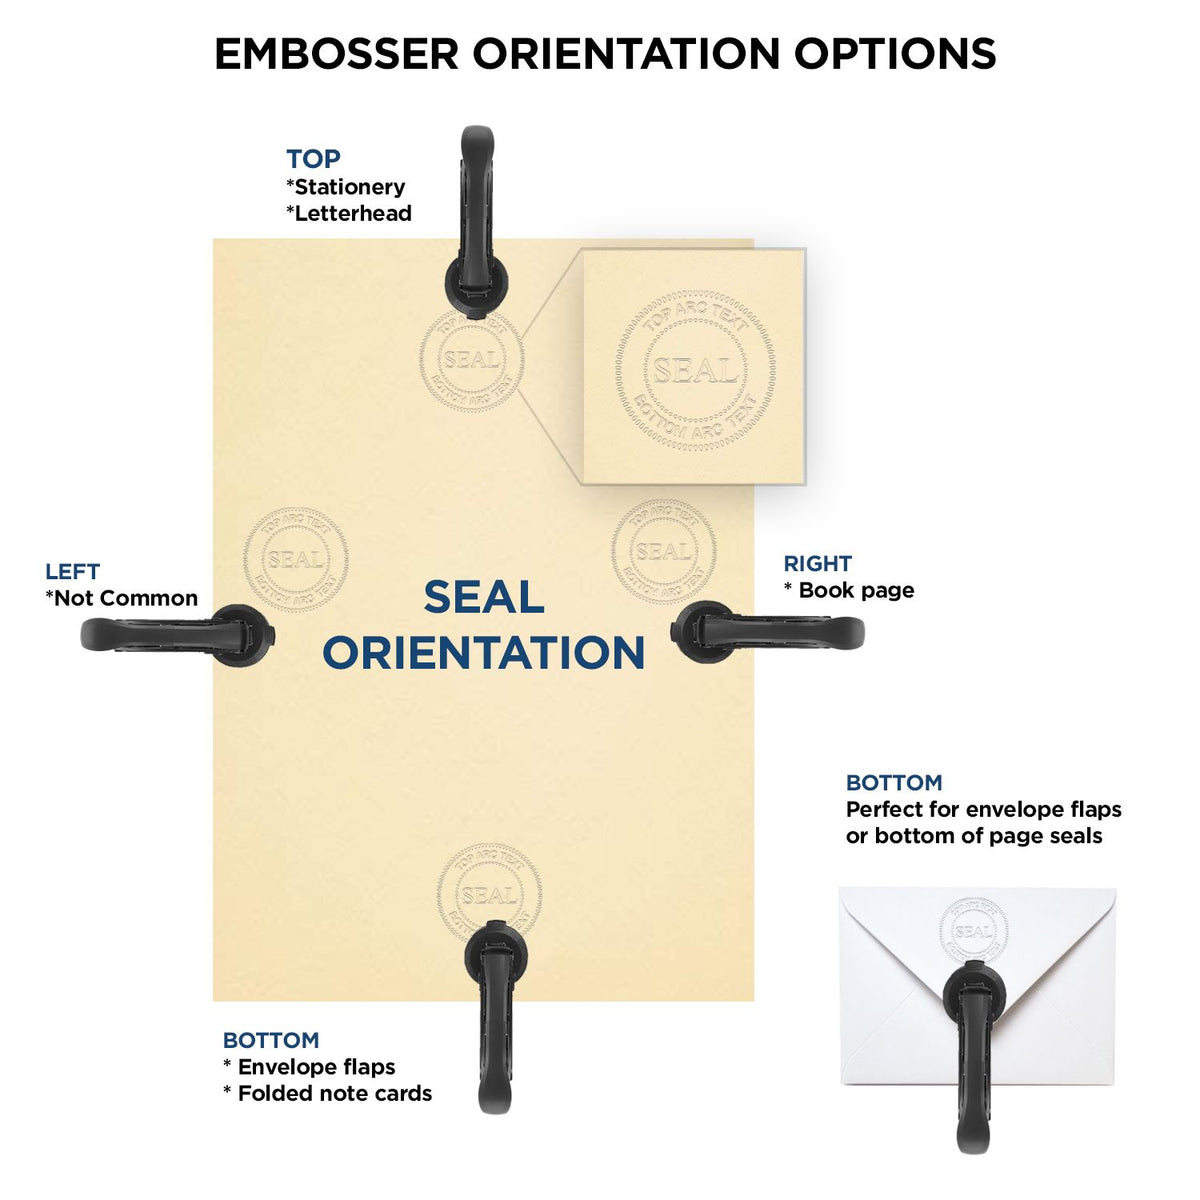 An infographic for the State of Kentucky Extended Long Reach Engineer Seal showing embosser orientation, this is showing examples of a top, bottom, right and left insert.